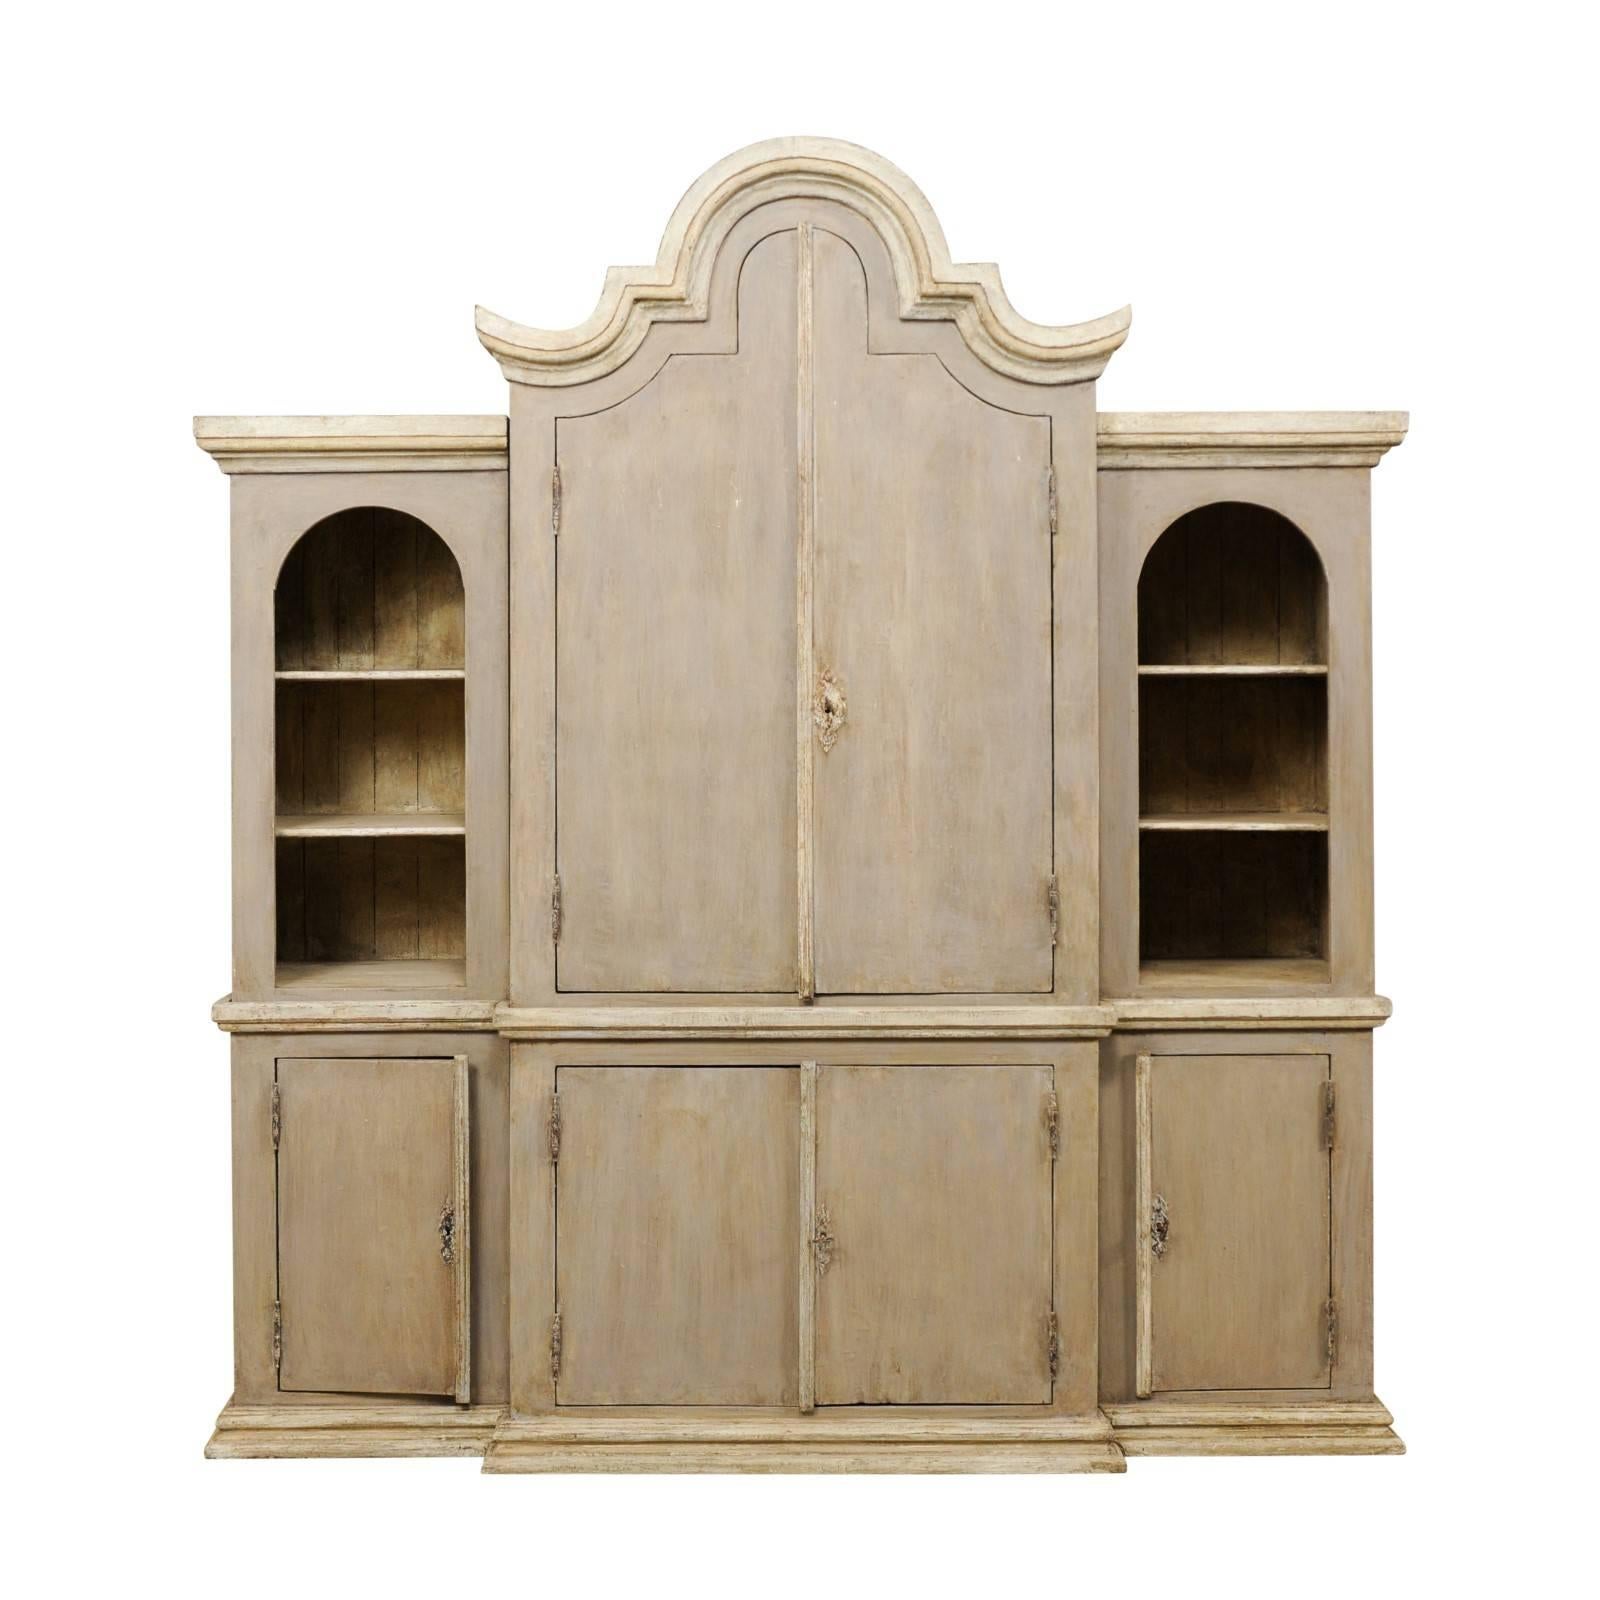 Large Brazilian Painted Wood Cabinet with Display Shelves and Storage